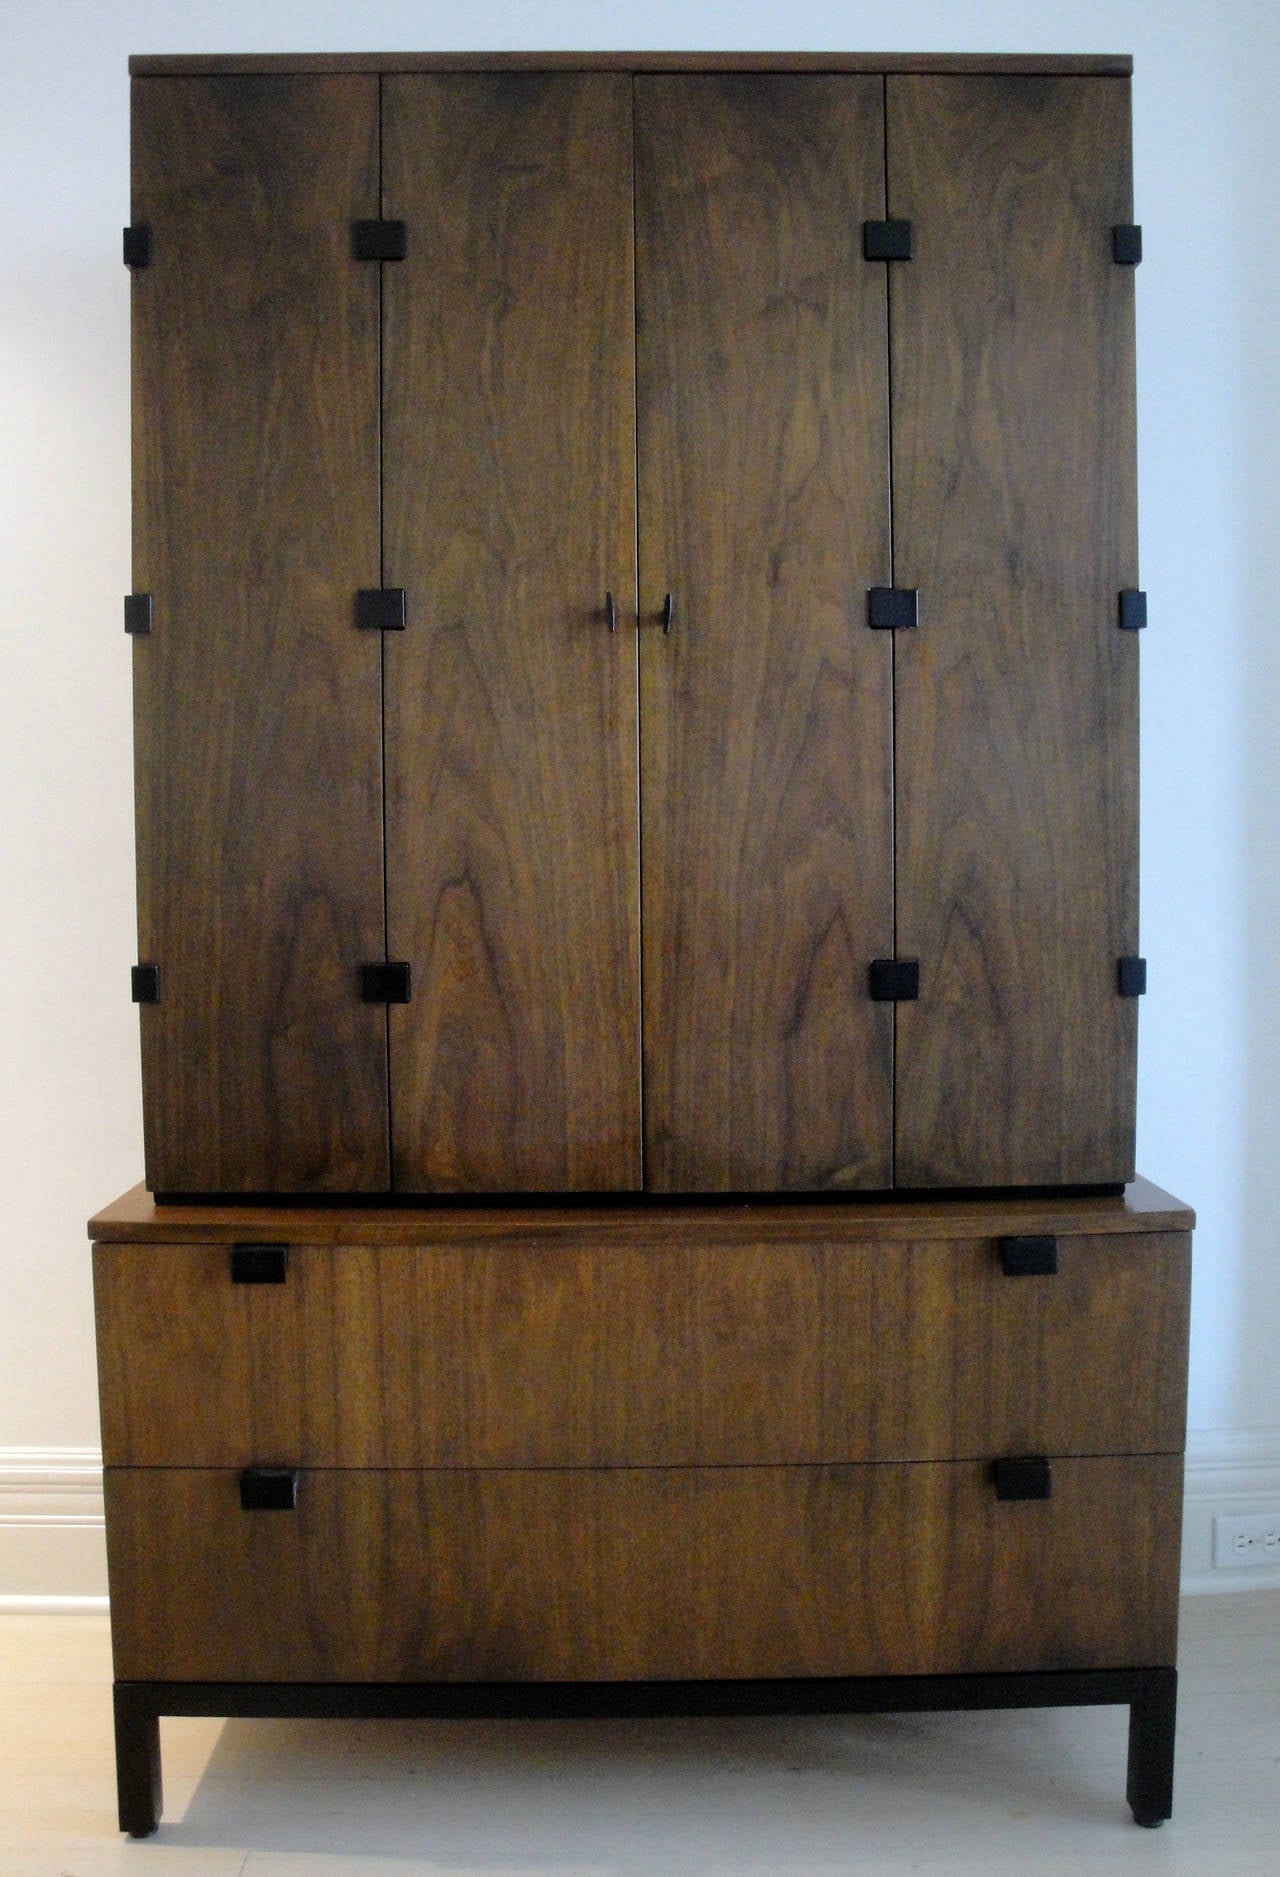 Kipp Stewart's walnut cabinet designed for Directional.
Bottom part consists of two drawers. The top part, a cabinet has detailed shelving and two small drawers.